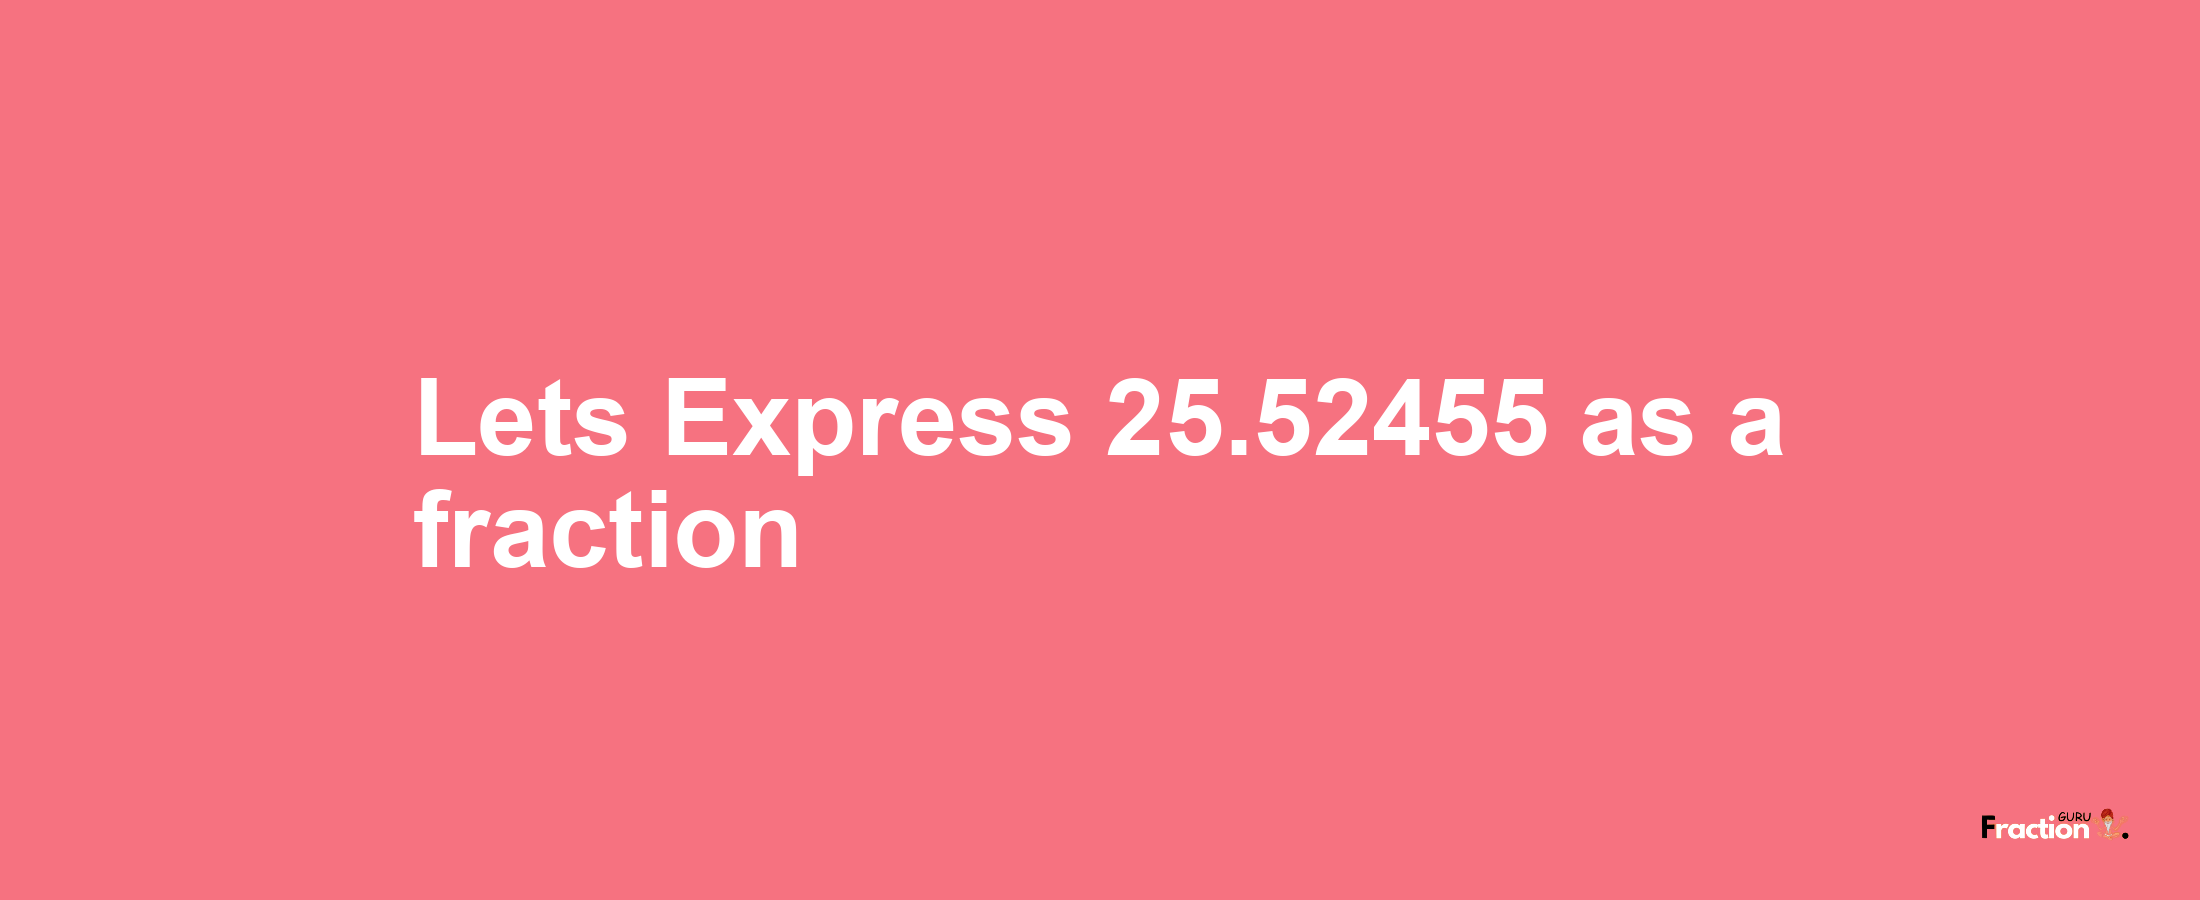 Lets Express 25.52455 as afraction